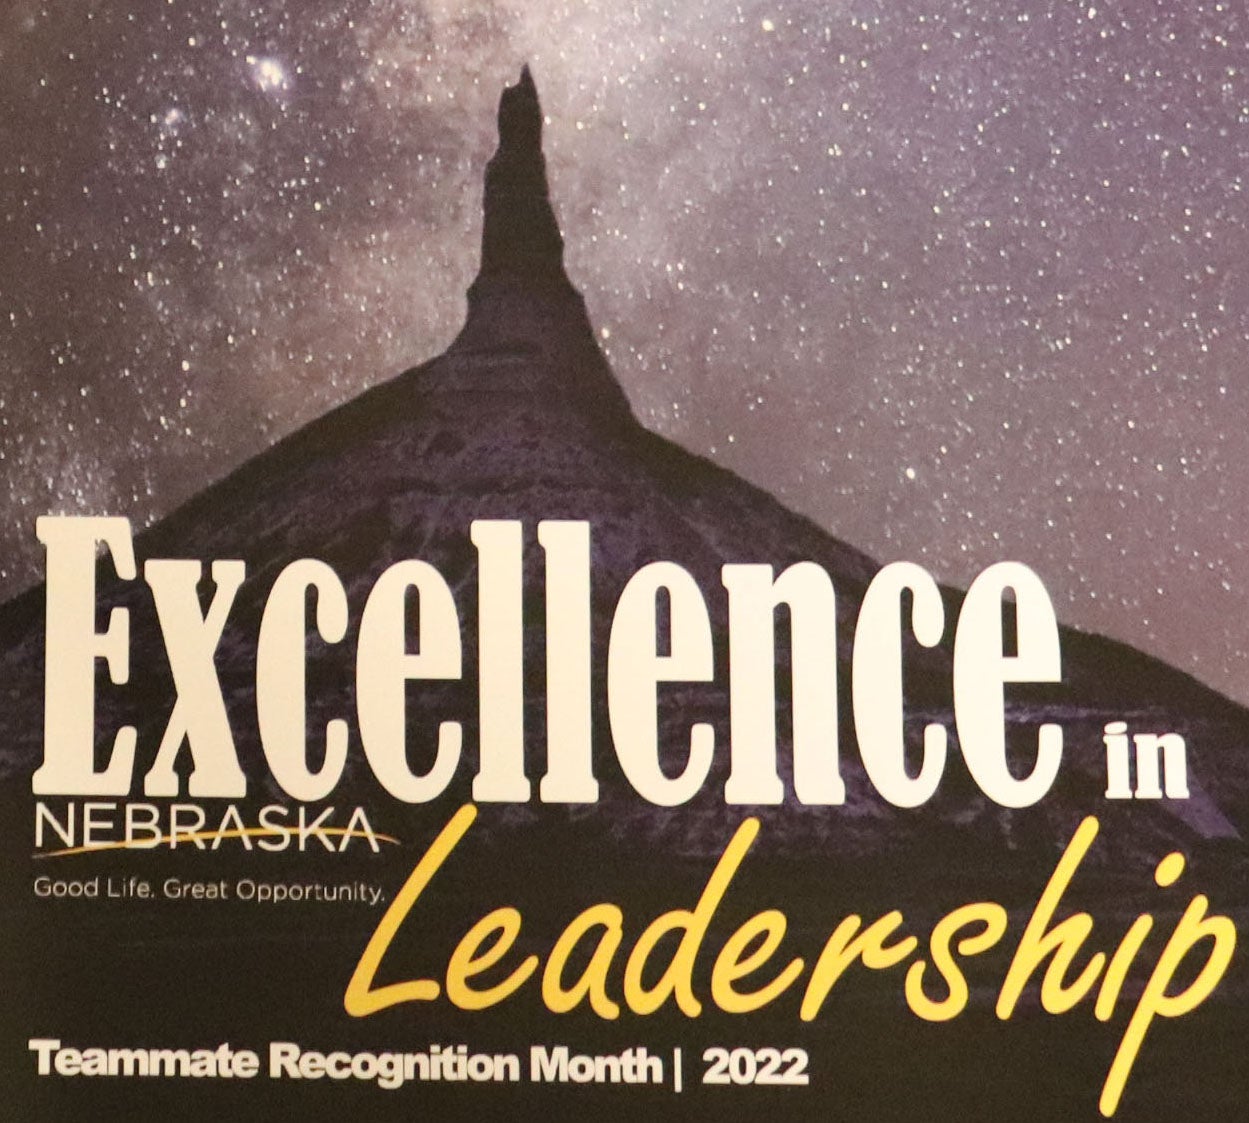 Excellence in Leadership Award